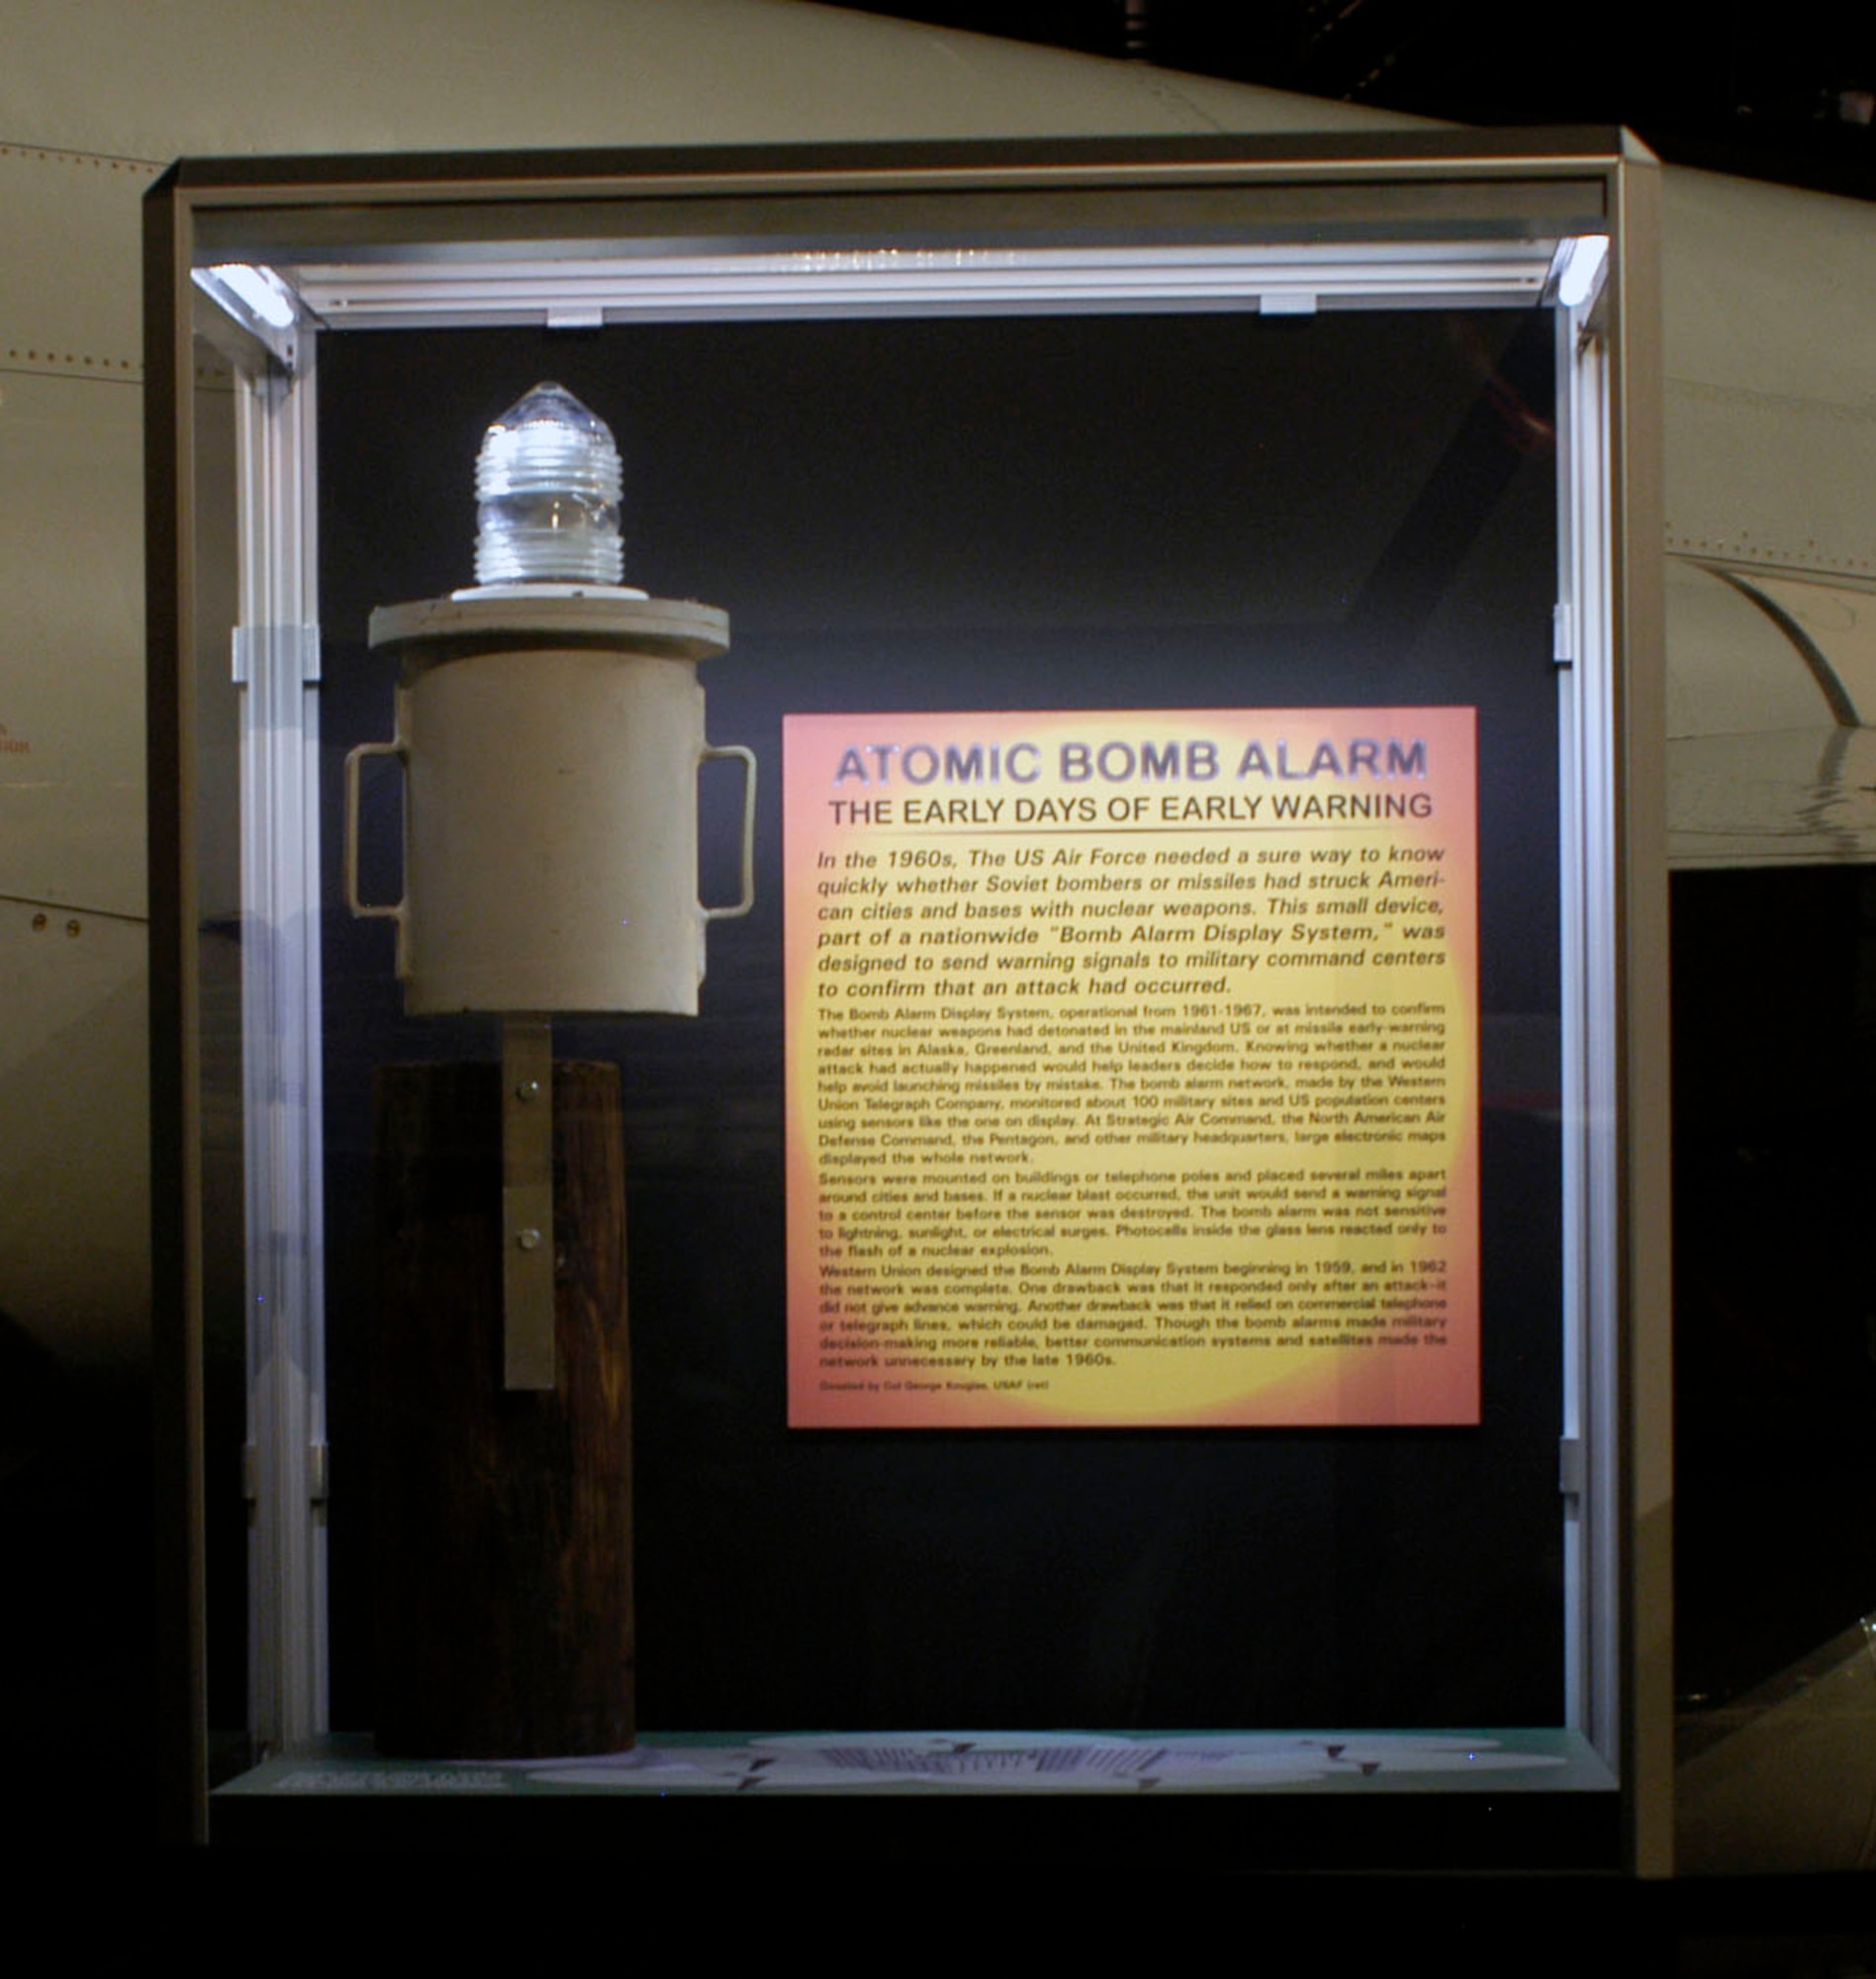 DAYTON, Ohio -- Atomic Bomb Alarm exhibit in the Cold War Gallery at the National Museum of the U.S. Air Force. (U.S. Air Force photo)